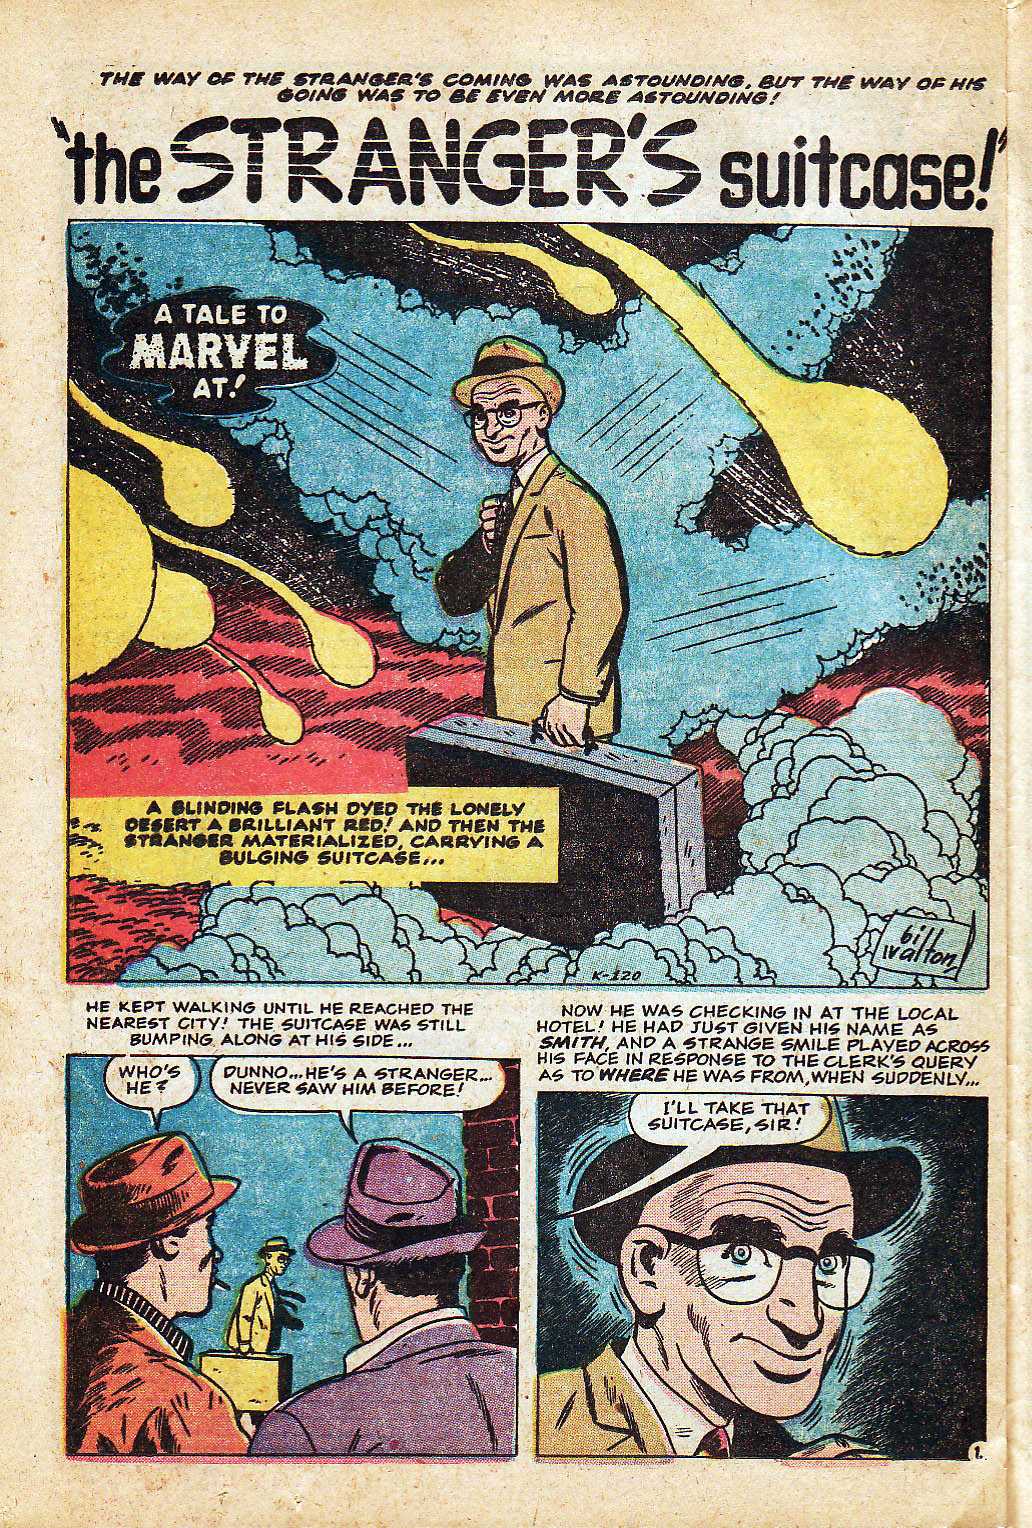 Marvel Tales (1949) 154 Page 23